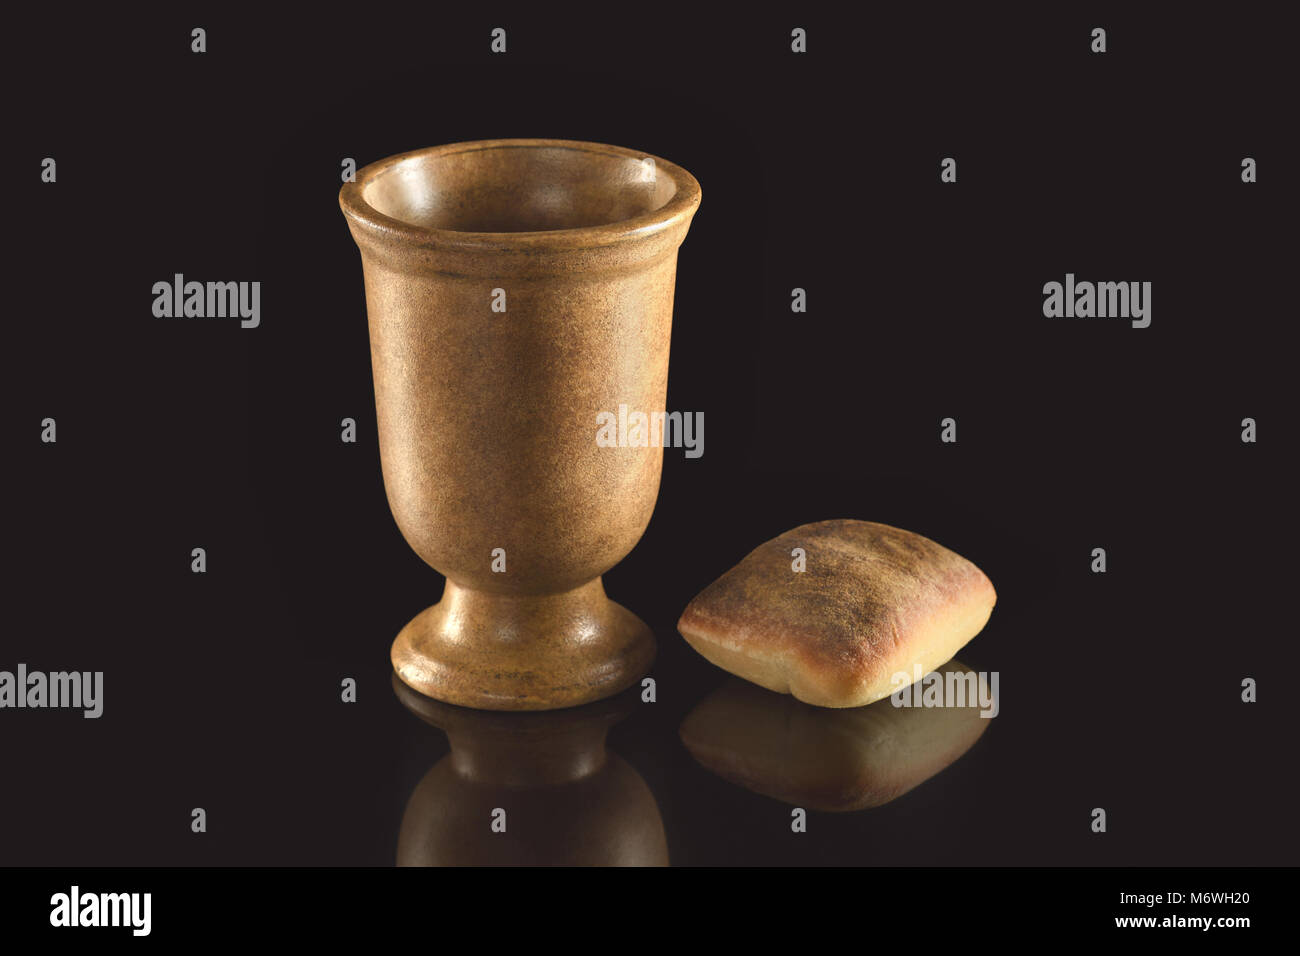 Cup of wine and bread on reflective table over dark background Stock Photo